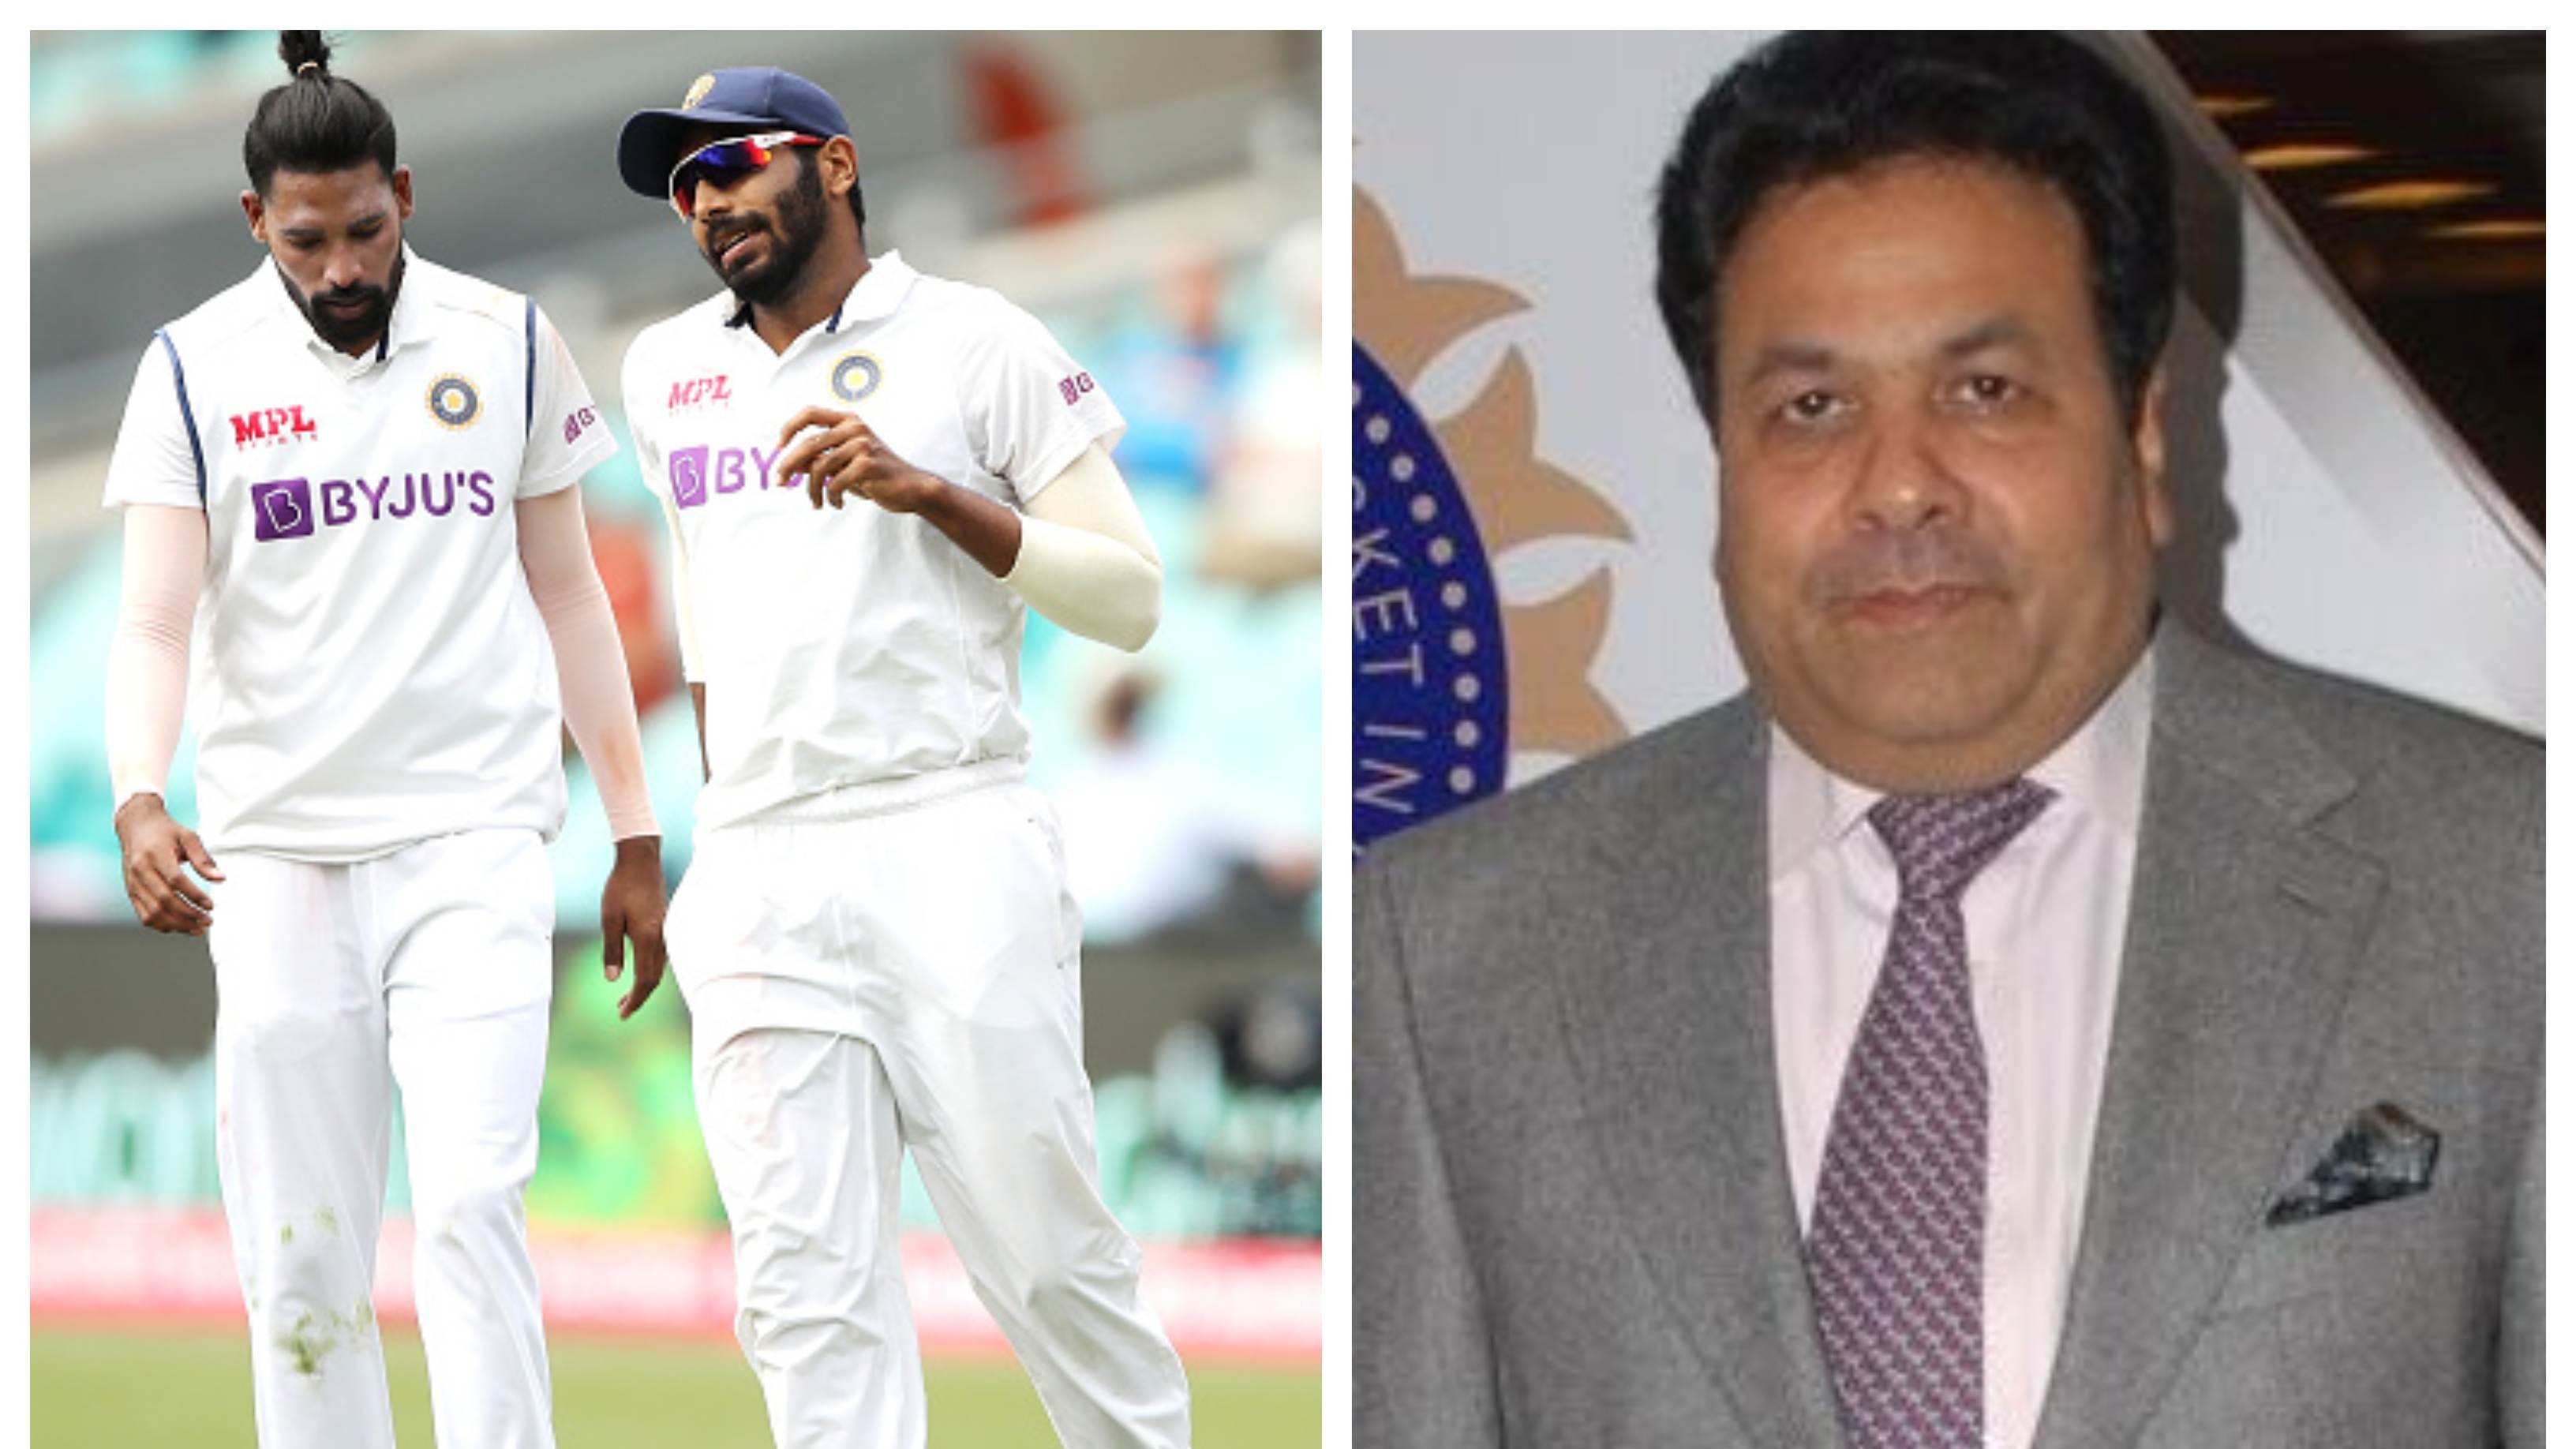 AUS v IND 2020-21: ‘Cricket is a gentleman’s game, racial abuse unacceptable’ – BCCI Vice President Rajeev Shukla